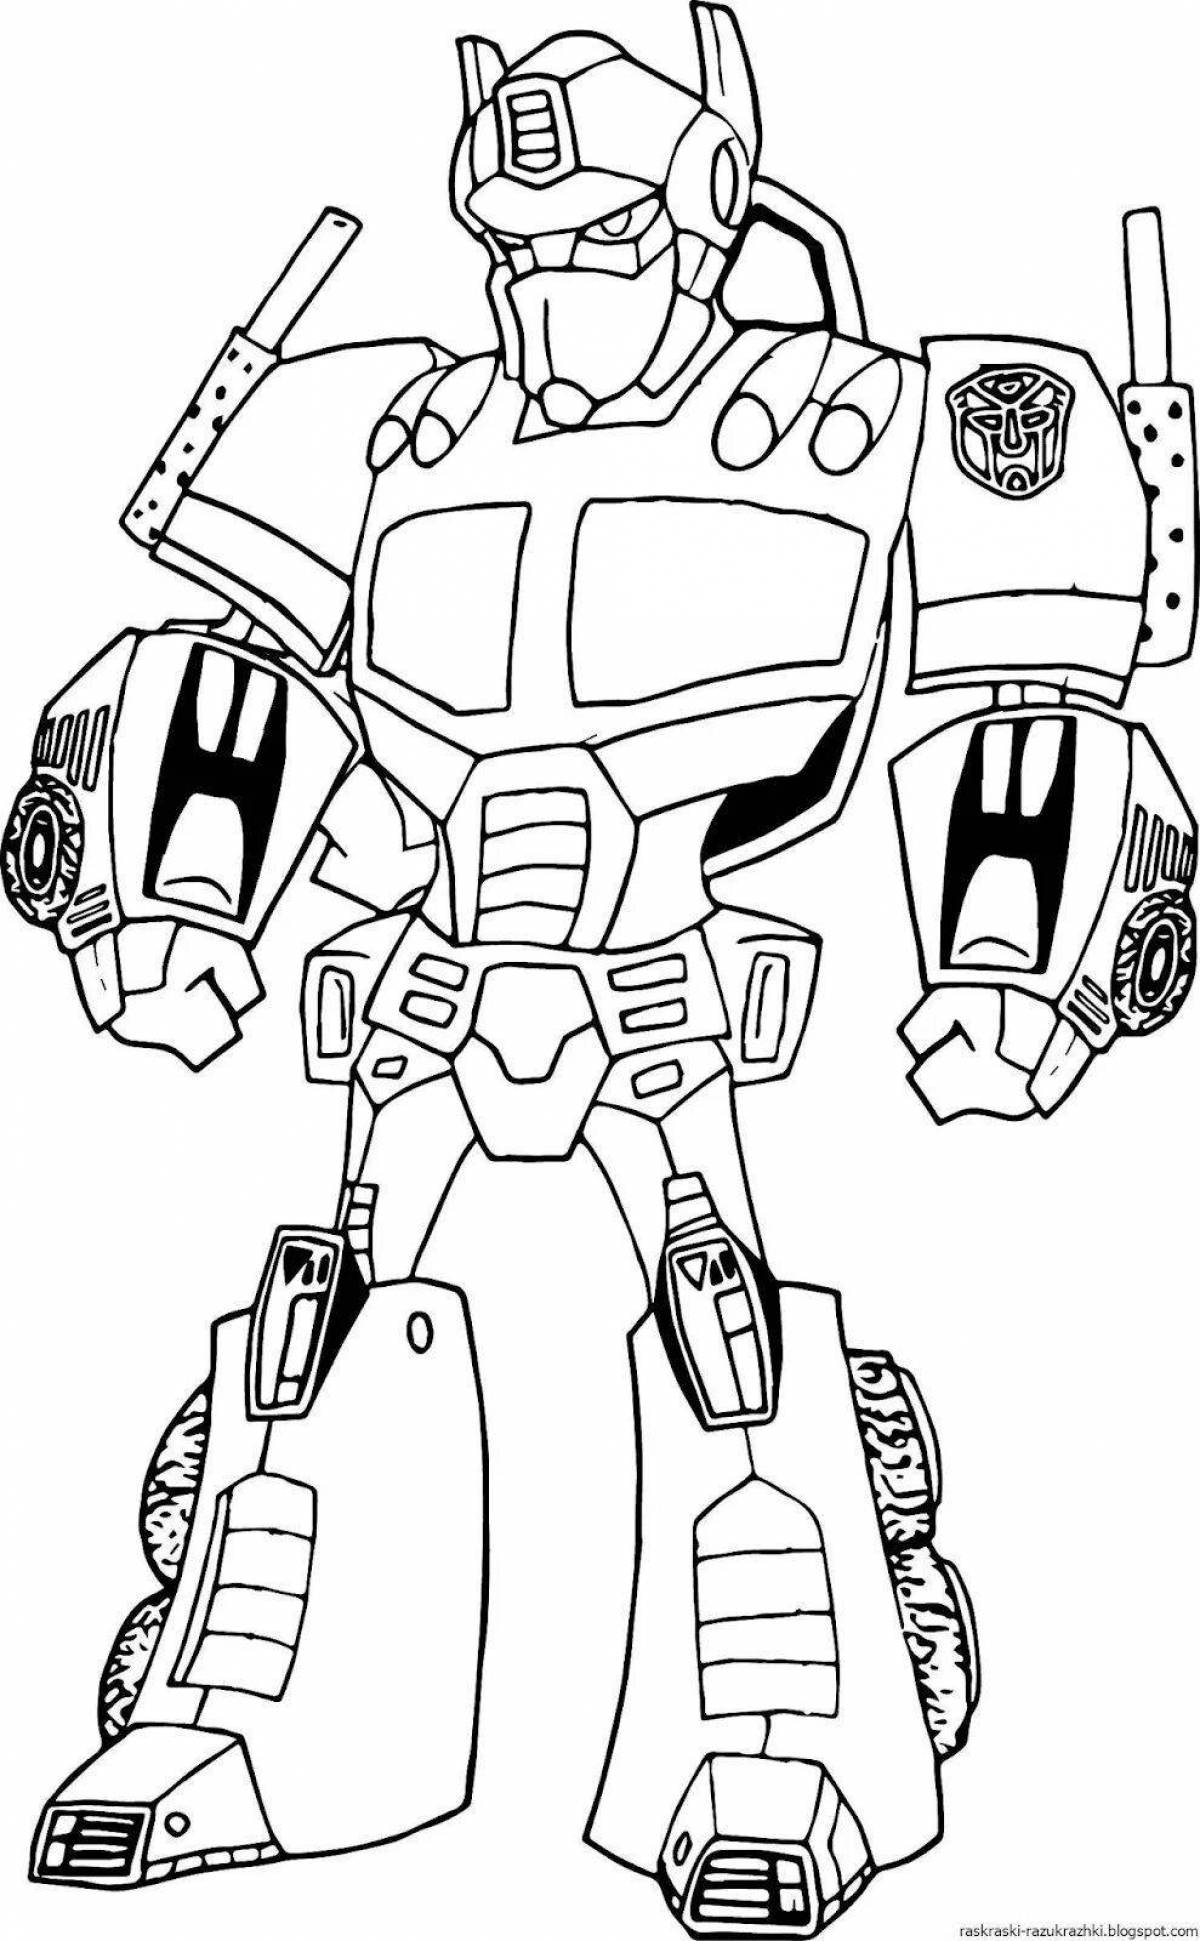 Exquisite tobot coloring pages for kids